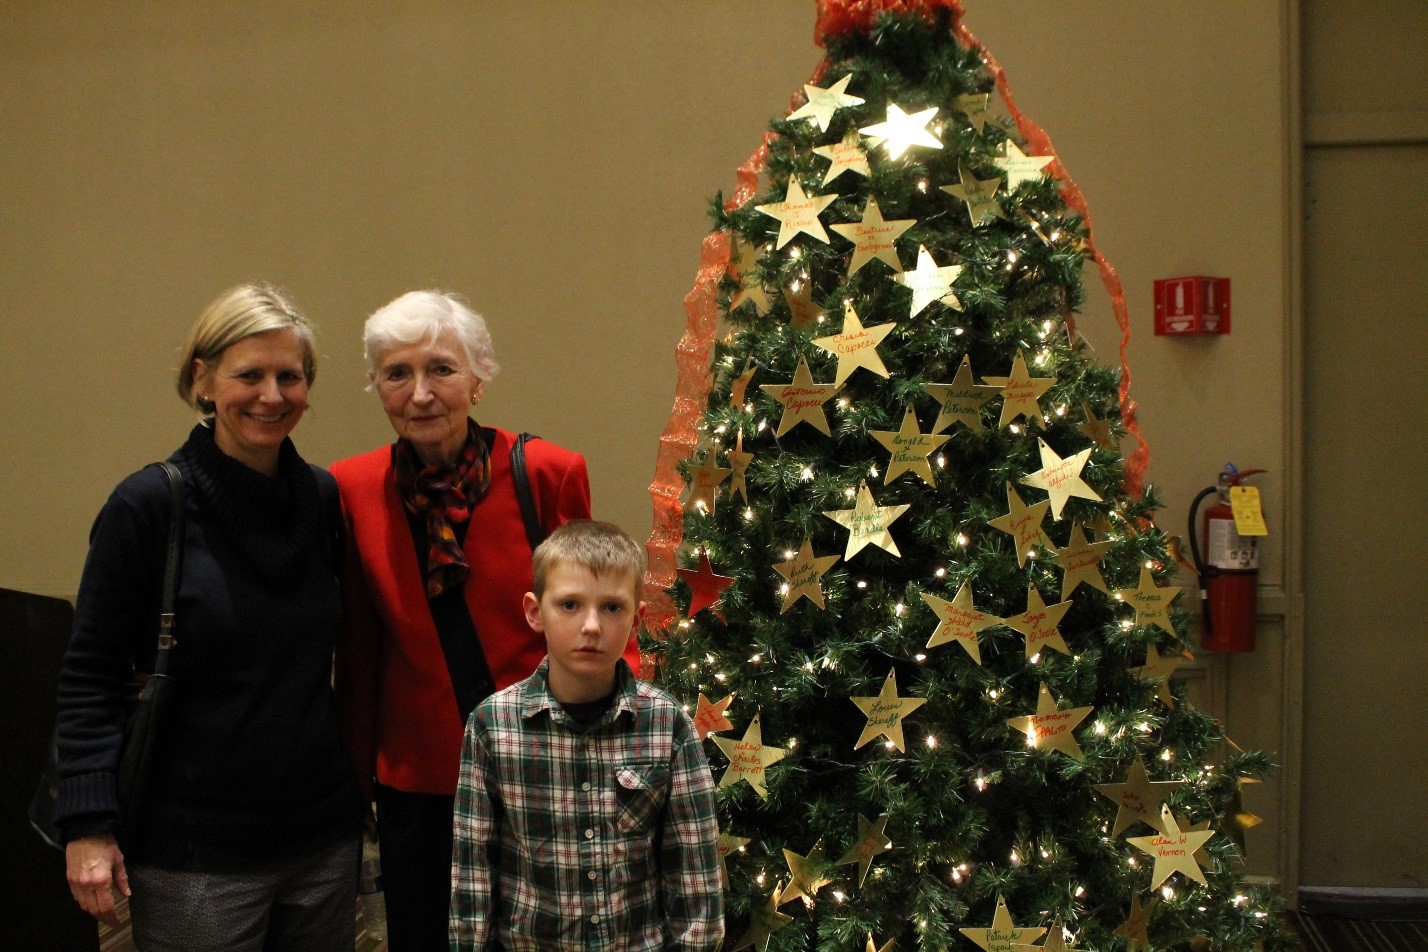 Three generations come together at HOW’s “Tree of Life” reception on December 7 at The Hilton Westchester. L-R: Tania Vernon, her mother Helga Vernon and son Brian Sciurba